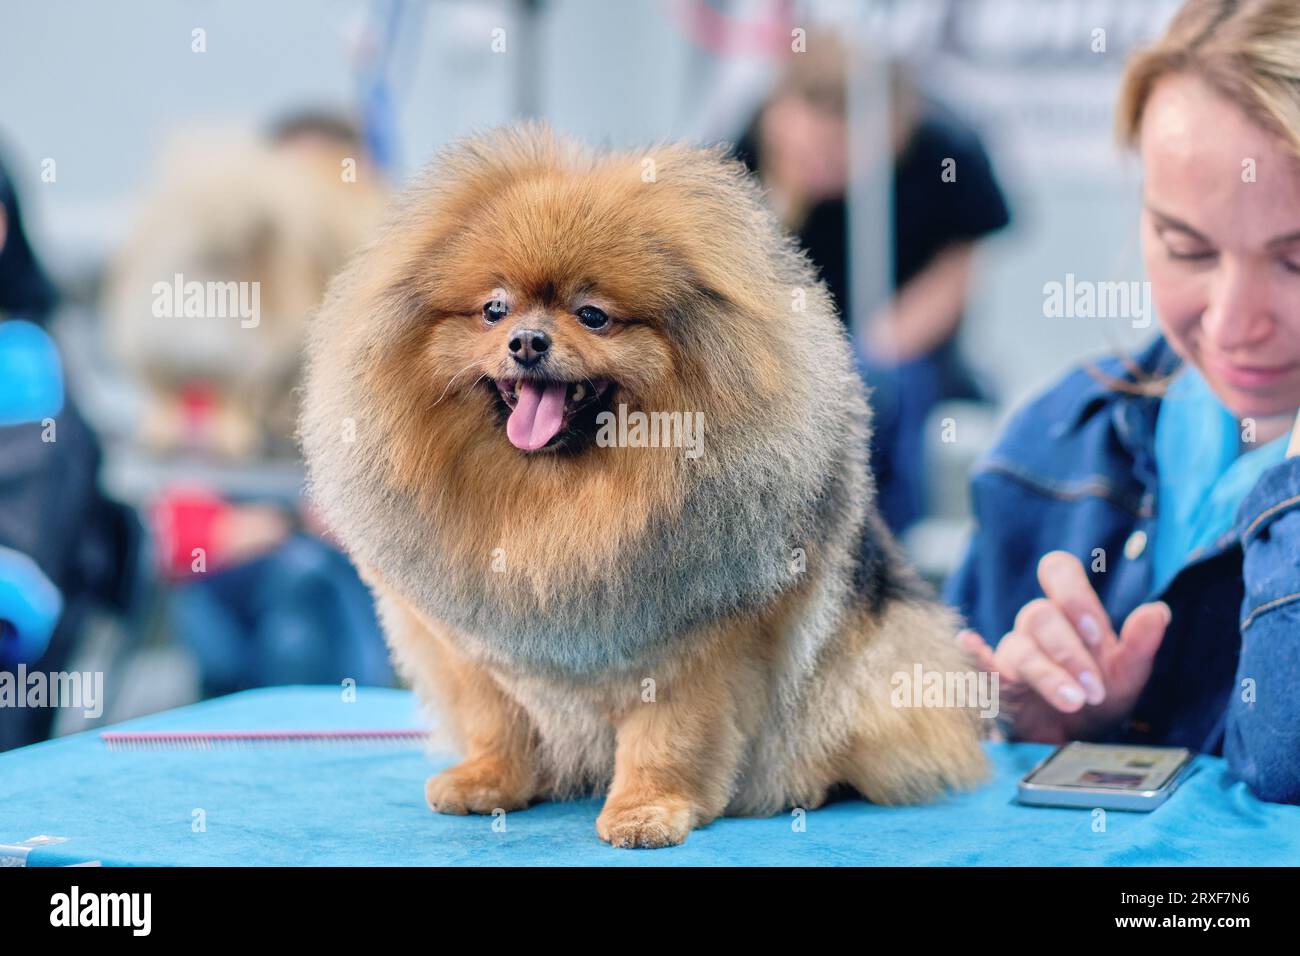 After grooming the dog Spitz Pomeranian on the table in the pet salon. Stock Photo